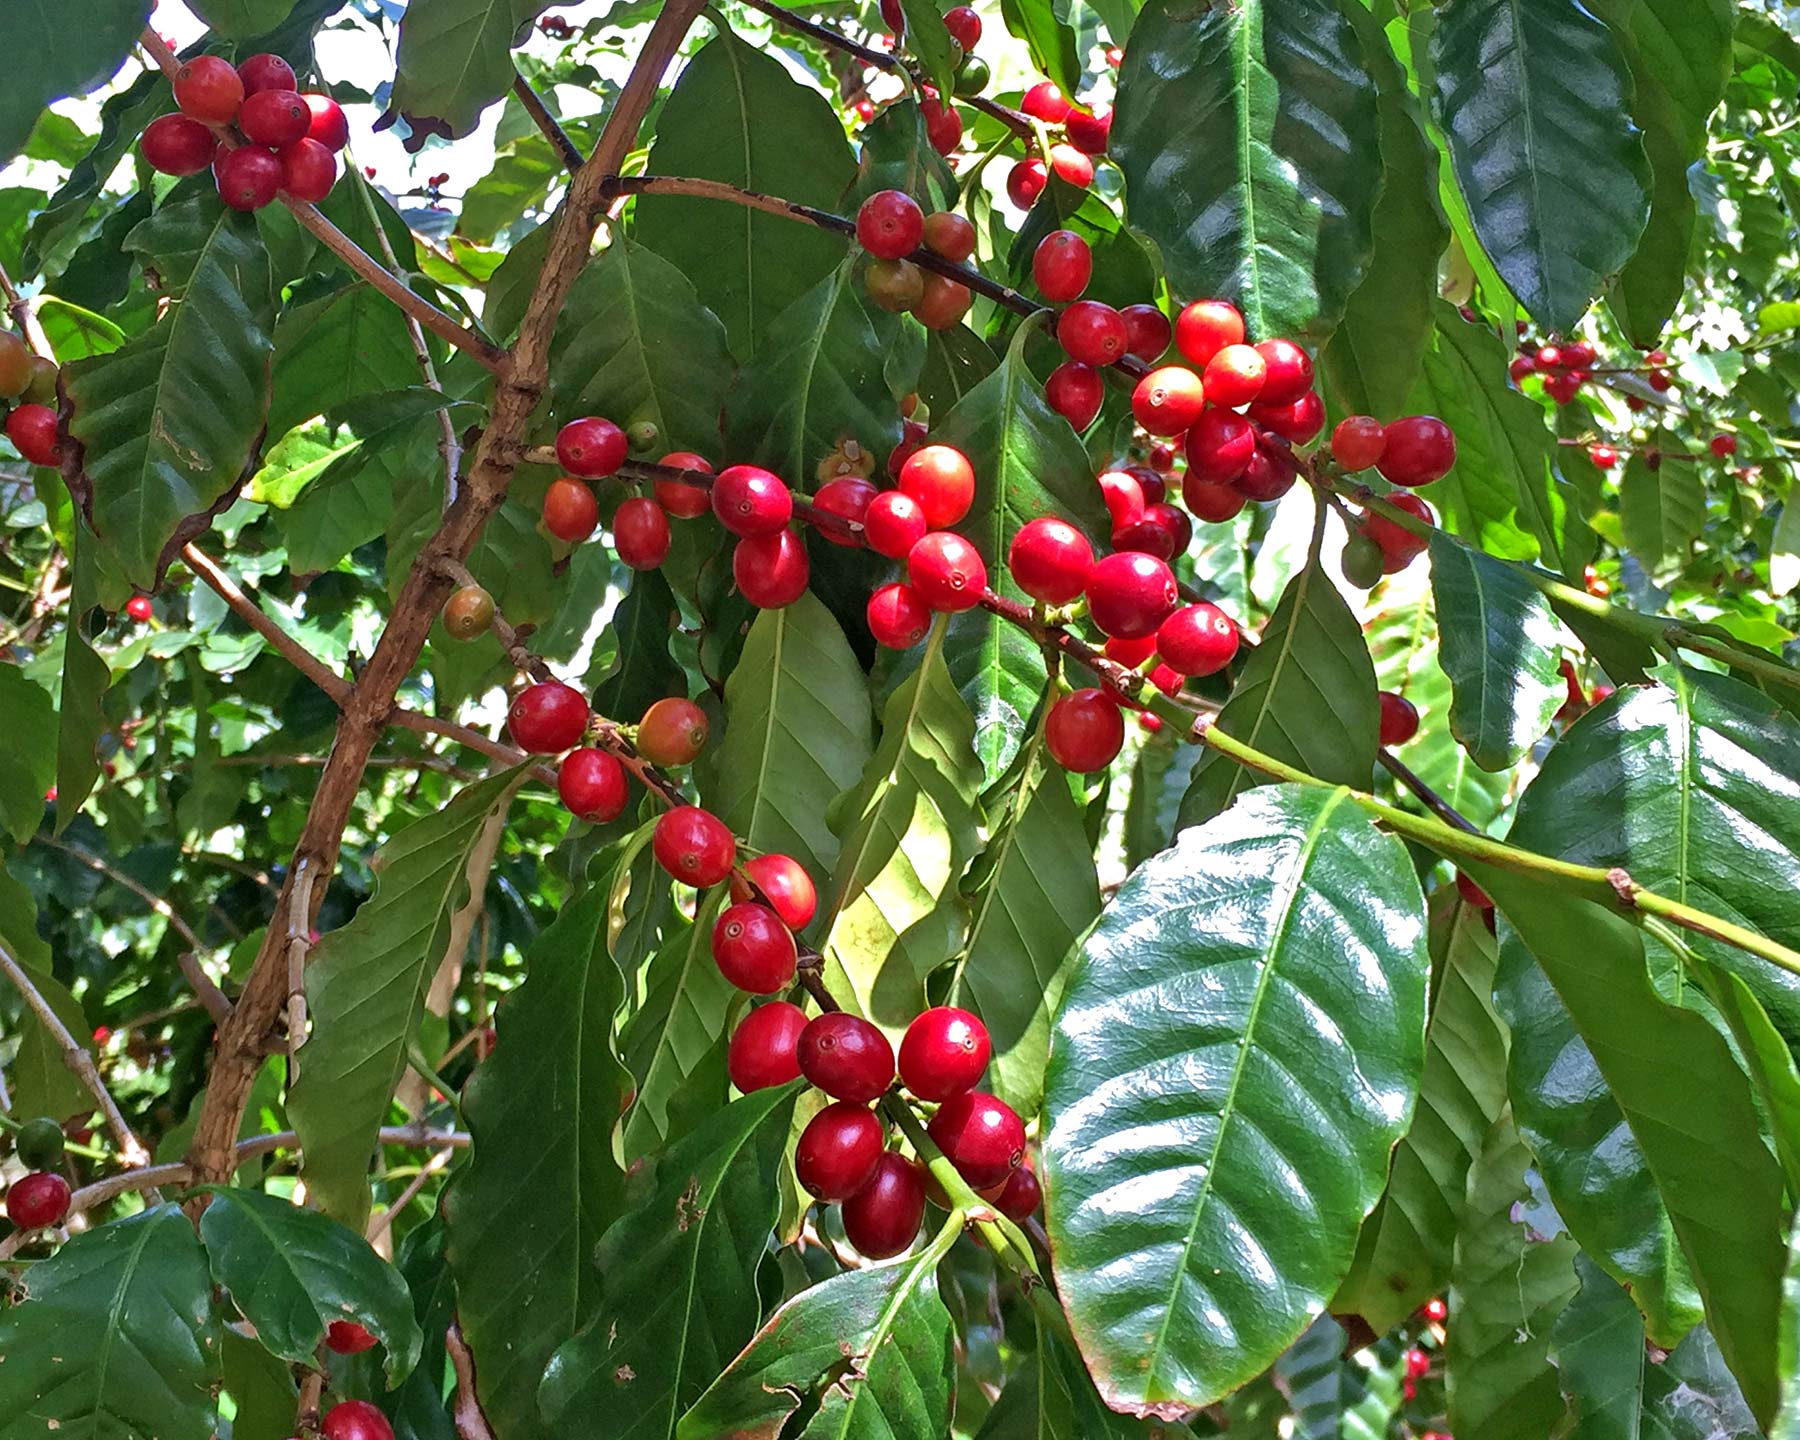 Coffea arabica - the fruit turns red as it ripens